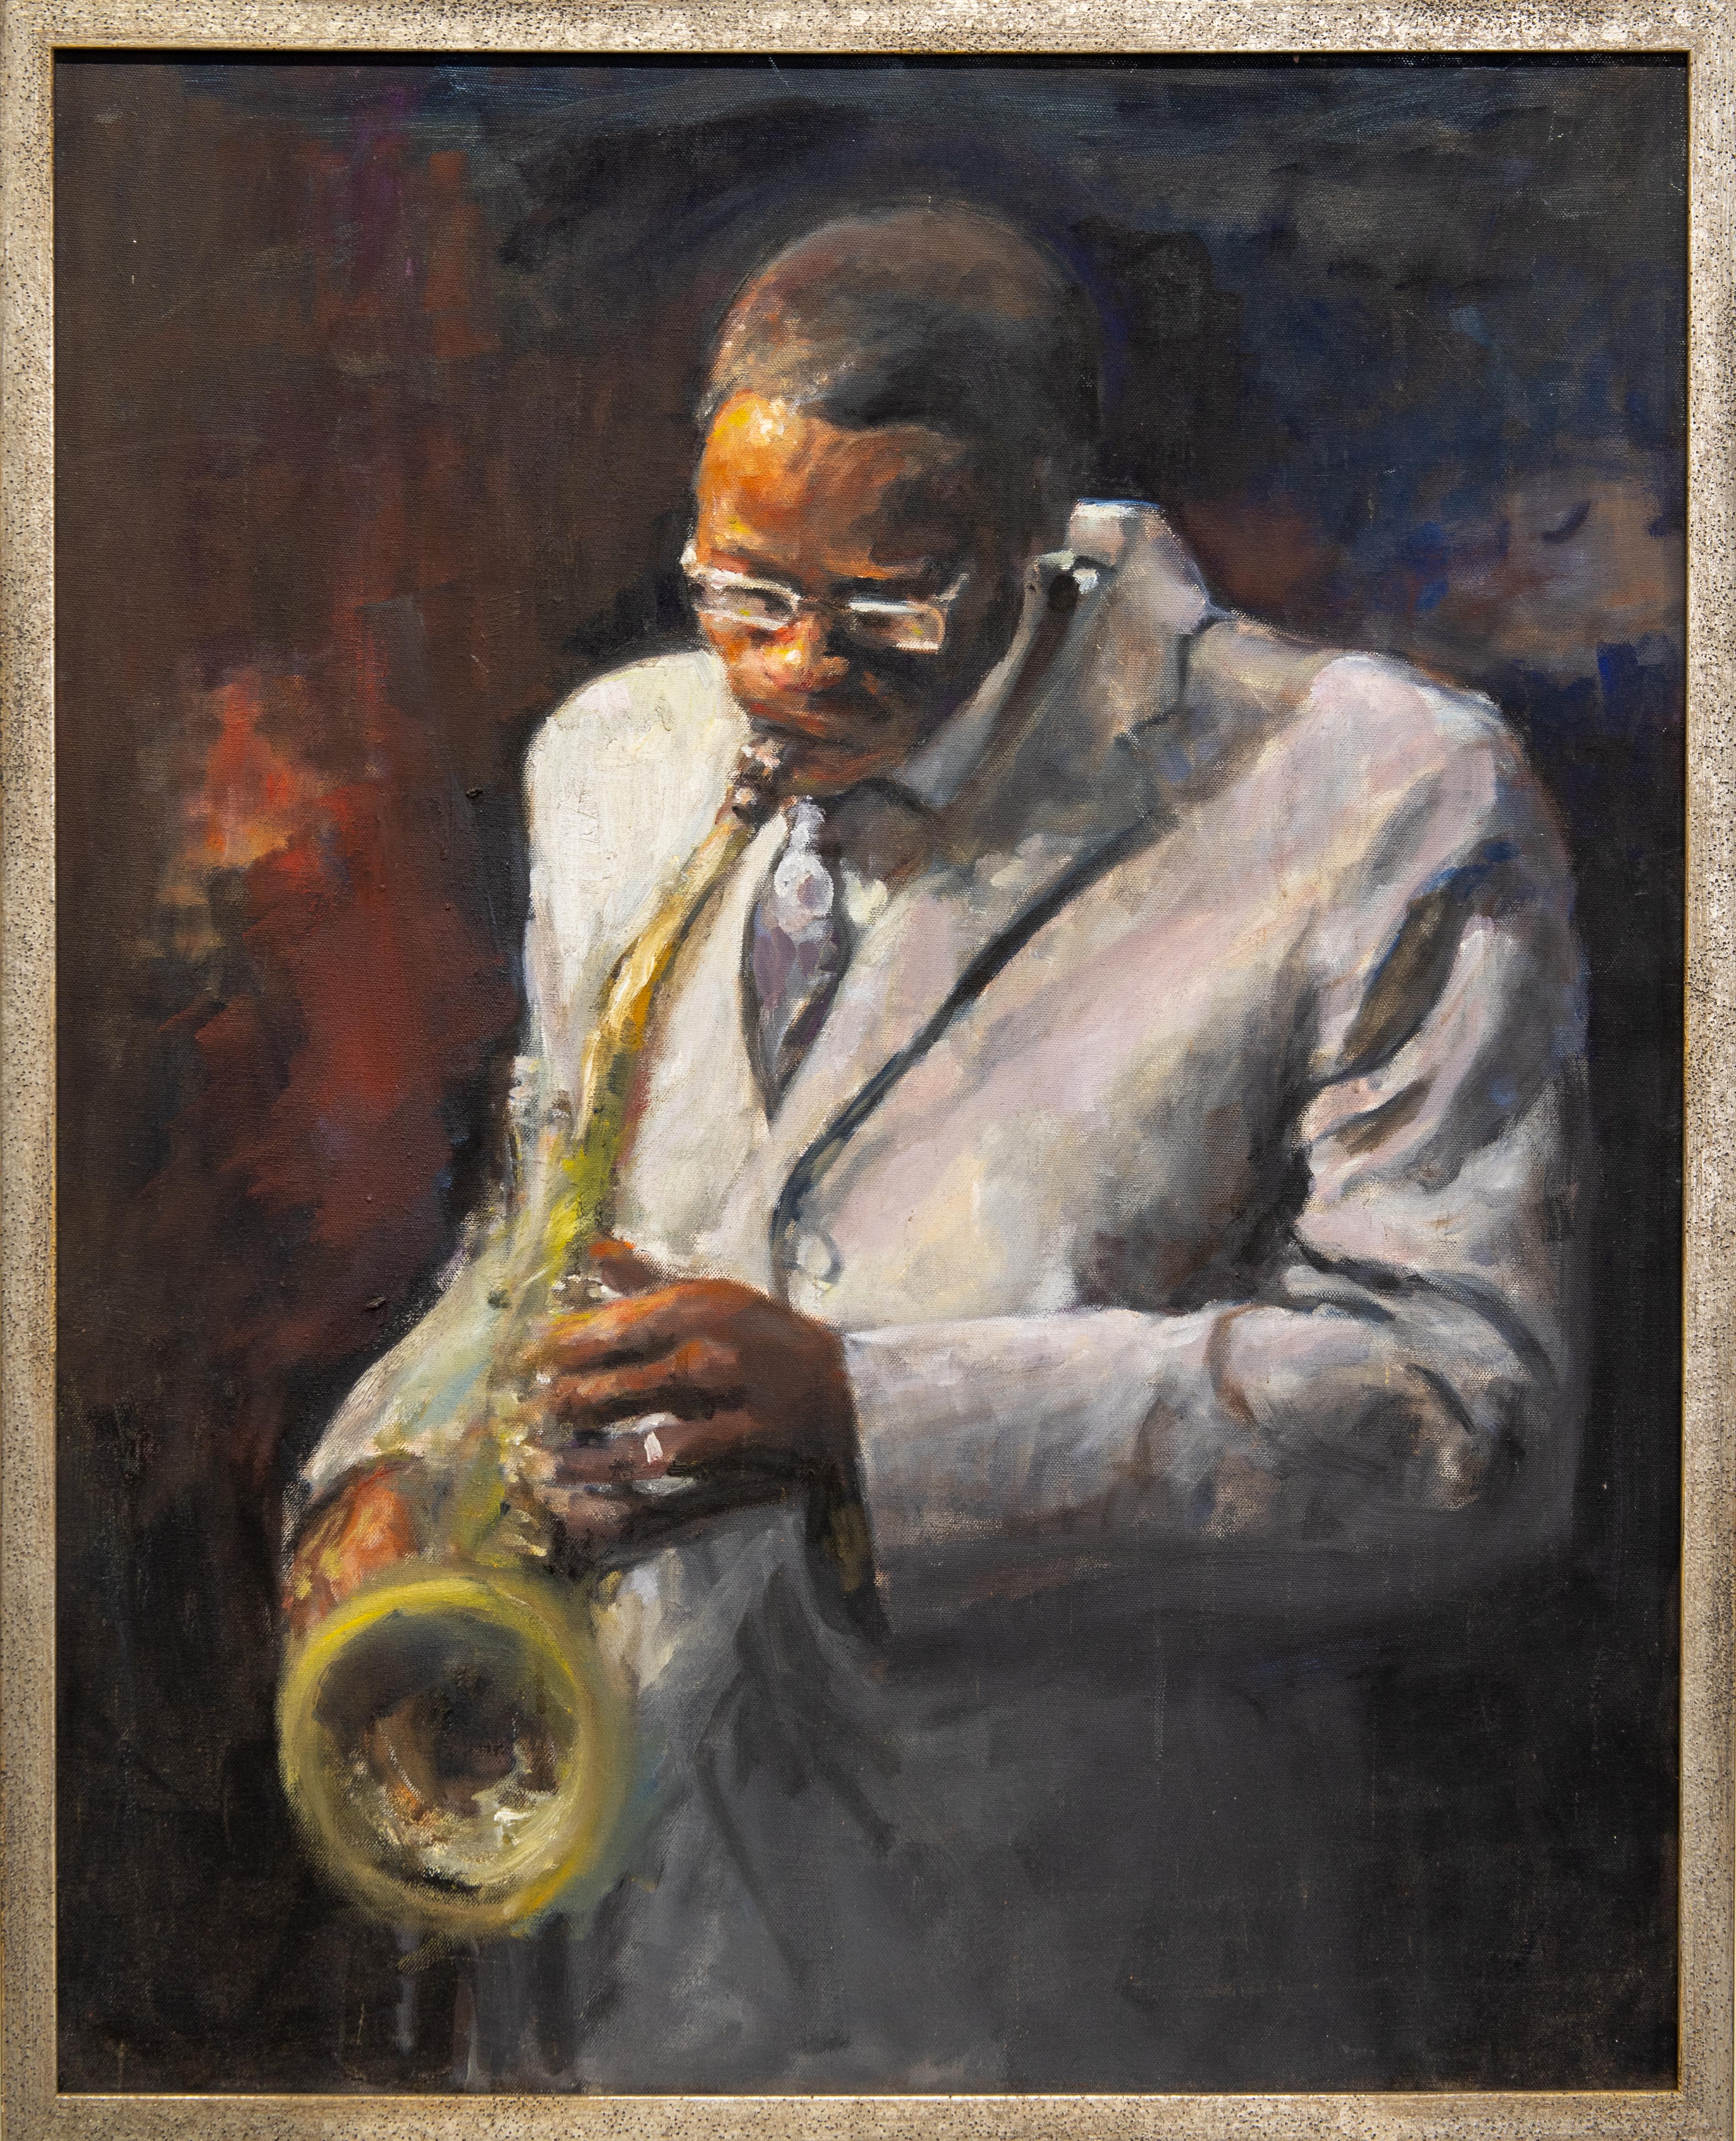 John Osler Figurative Painting - "Sax" Musician Playing Sax, Figurative, White Suit, Oil, Canvas